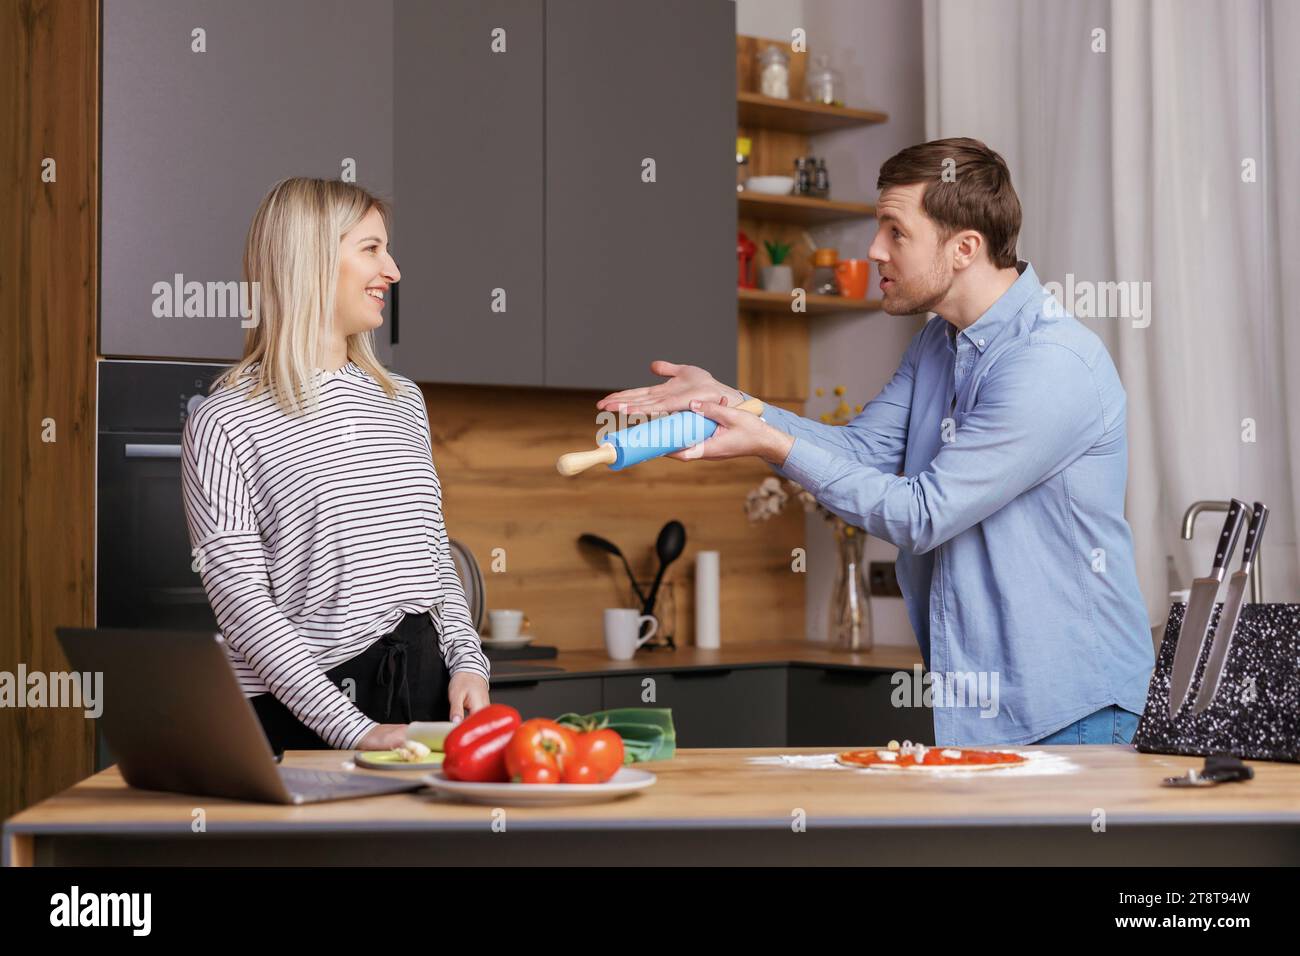 Leave Me Alone. A woman is preparing food, and a man is talking to her, and is not satisfied with the way she is cooking Stock Photo